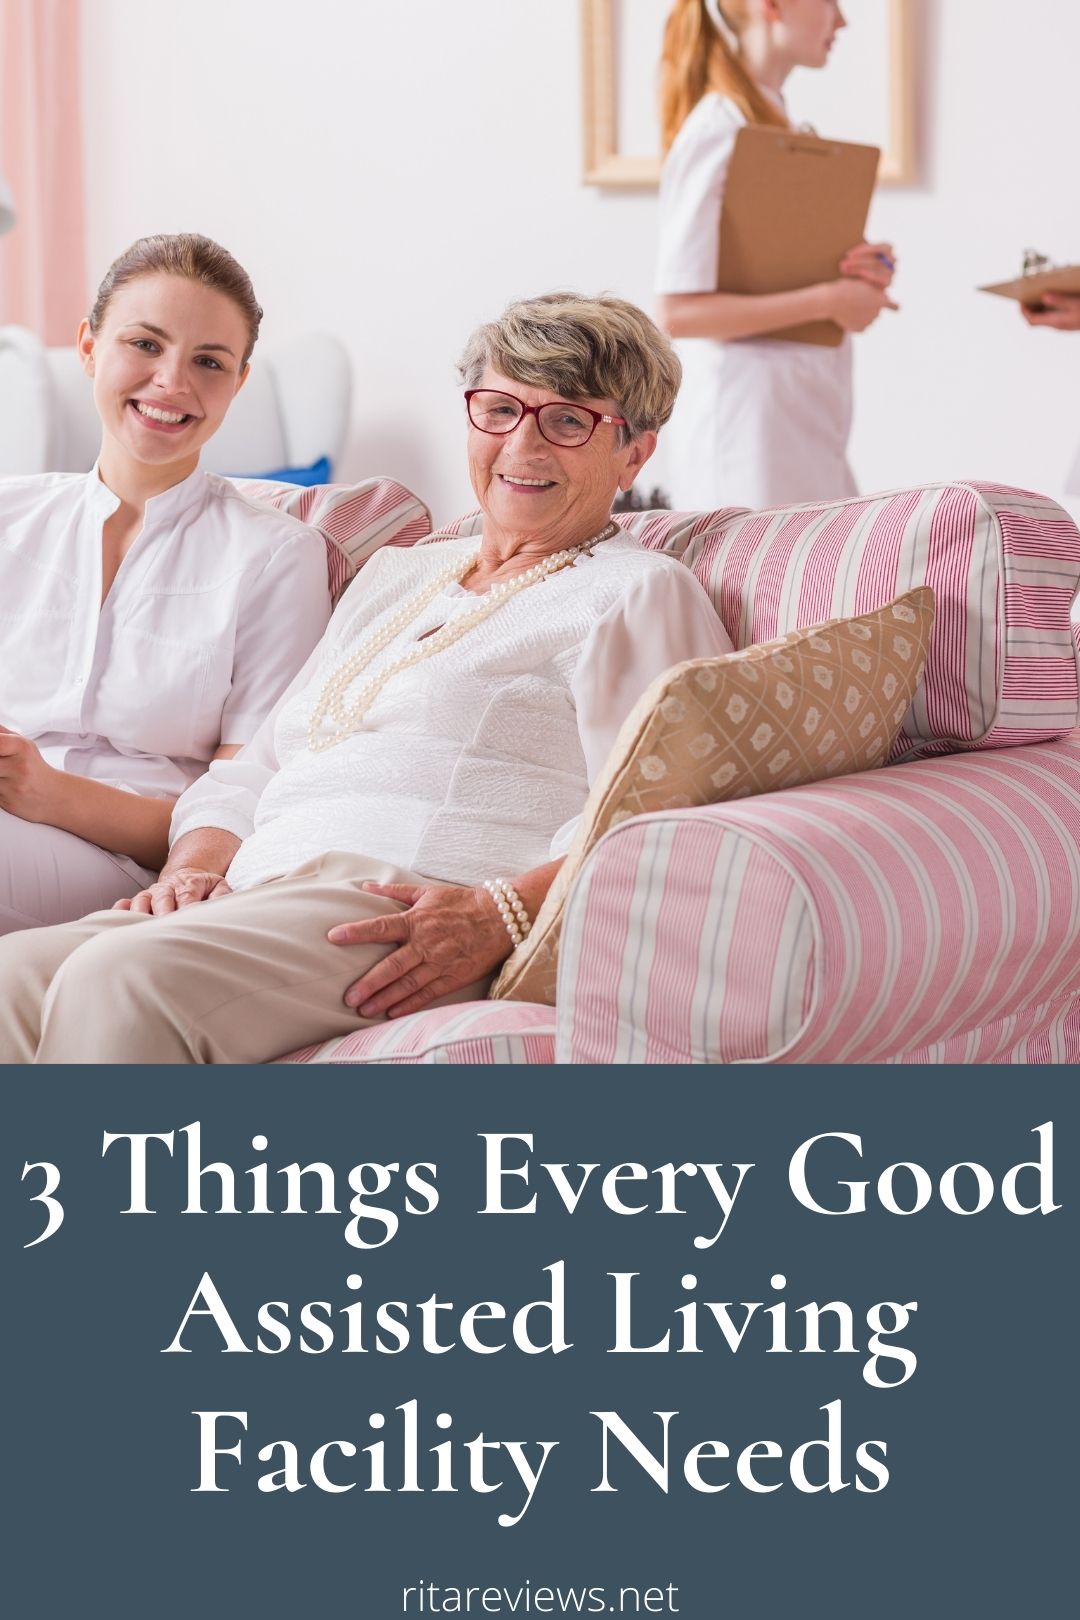 3 Things Every Good Assisted Living Facility Needs